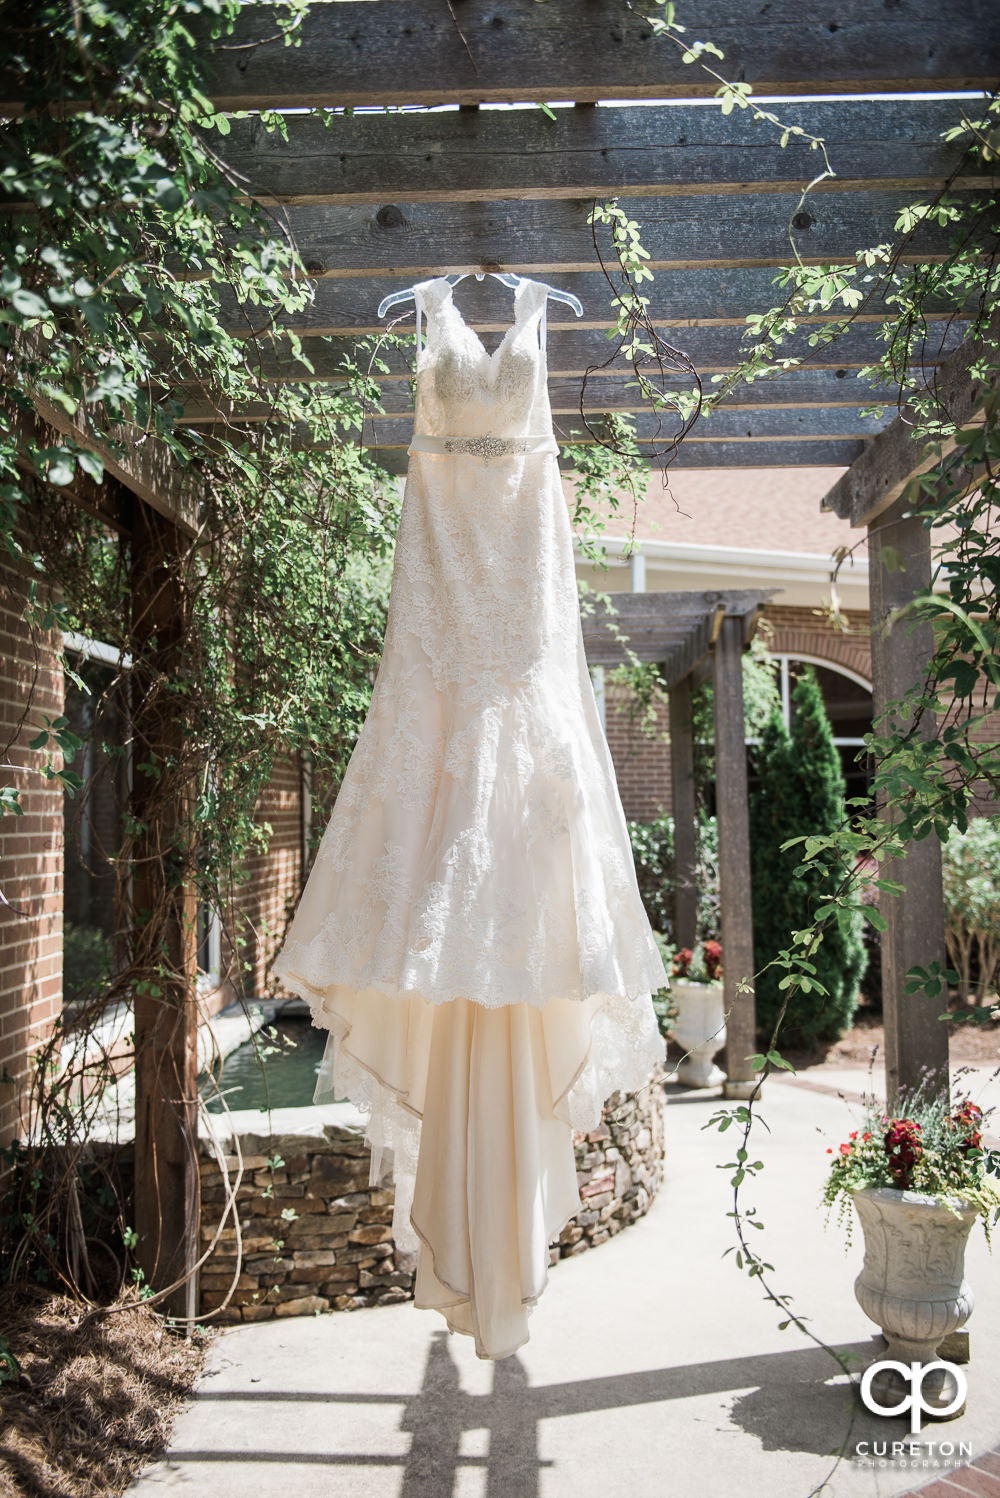 Bride's dress hanging at the church.